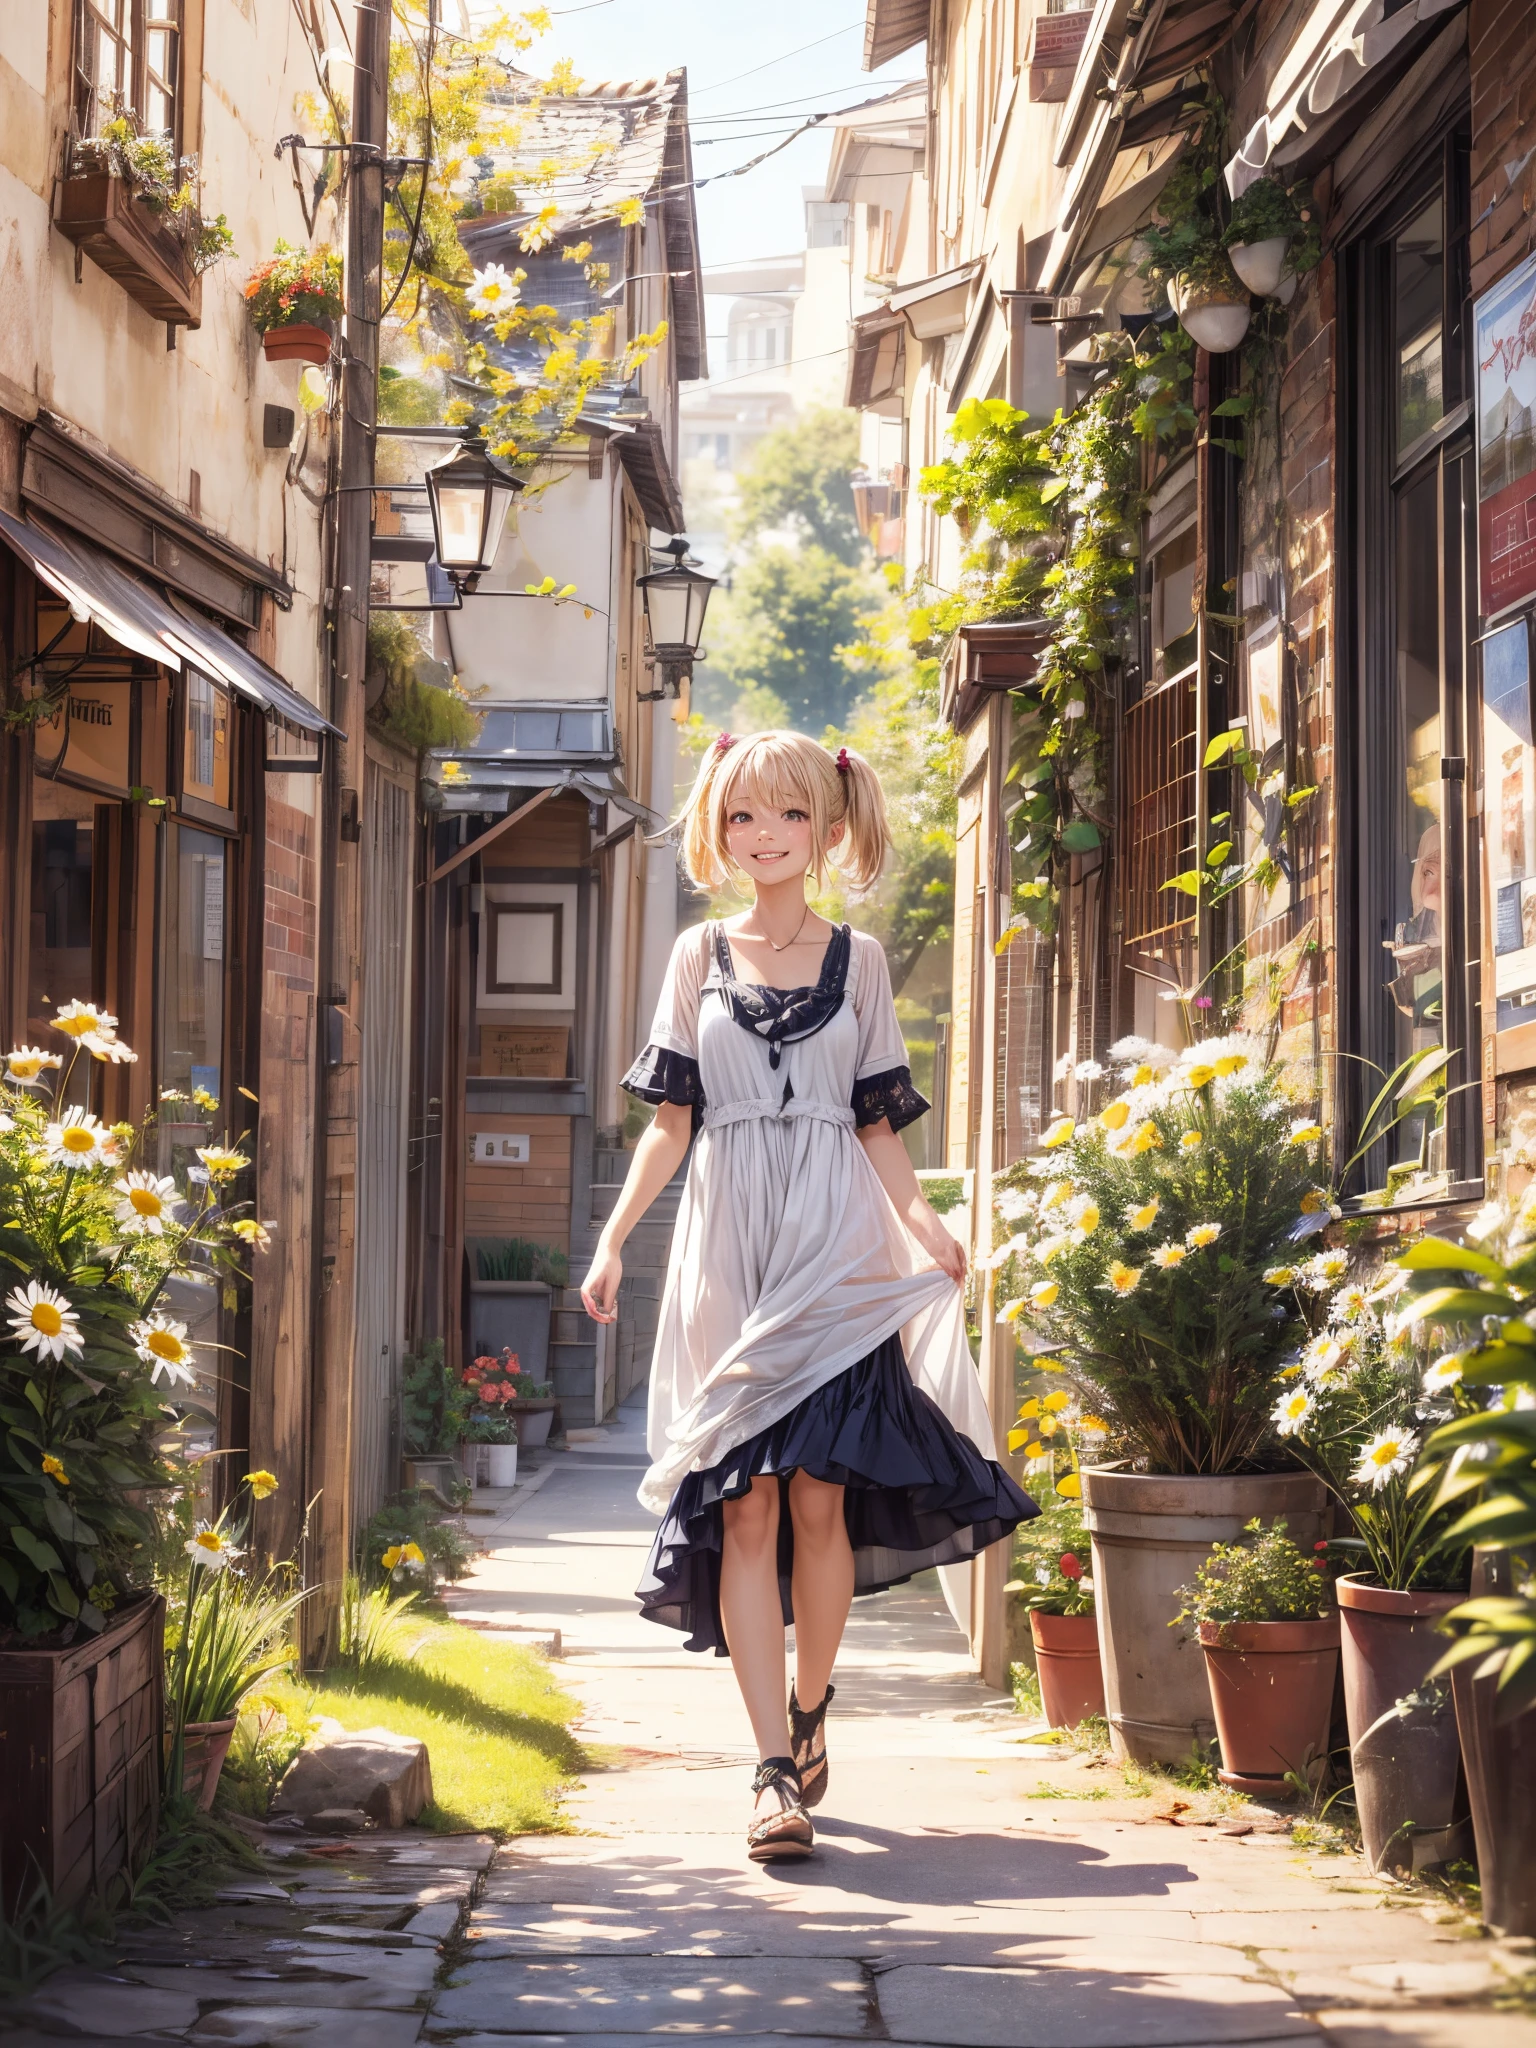 (Best Quality),hight resolution,(Realistic:1.37),Portrait,Garden Girl,Beautiful detailed eyes,Detailed lips,Vivid colors,(kindly smile:1.4),(Girl walking in town),(Nostalgic atmosphere) ,(Short hair),(Low blonde hair, Loose and fluffy twin tails:1.2),Bright dresses,The town is surrounded by mysterious boundaries,Cool morning clouds are calm and peaceful, Quietly leads you to a sea of memories,Walk through a field of daisies,The tree々Gentle sunlight shines in,The beauty of tears, Like multicolored glass, Carried by the autumn breeze,Someday it will be full of fallen leaves,gentle sunlight,Soft breeze,Delicate flowers,Butterflies flutter by,calm and peaceful ambiance,Mesmerizing natural beauty,Whispering leaves,Subtle scent of summer grass,Whispers of happiness,Fragments of Shining Stars,Fleeting moments wrapped in eternity,